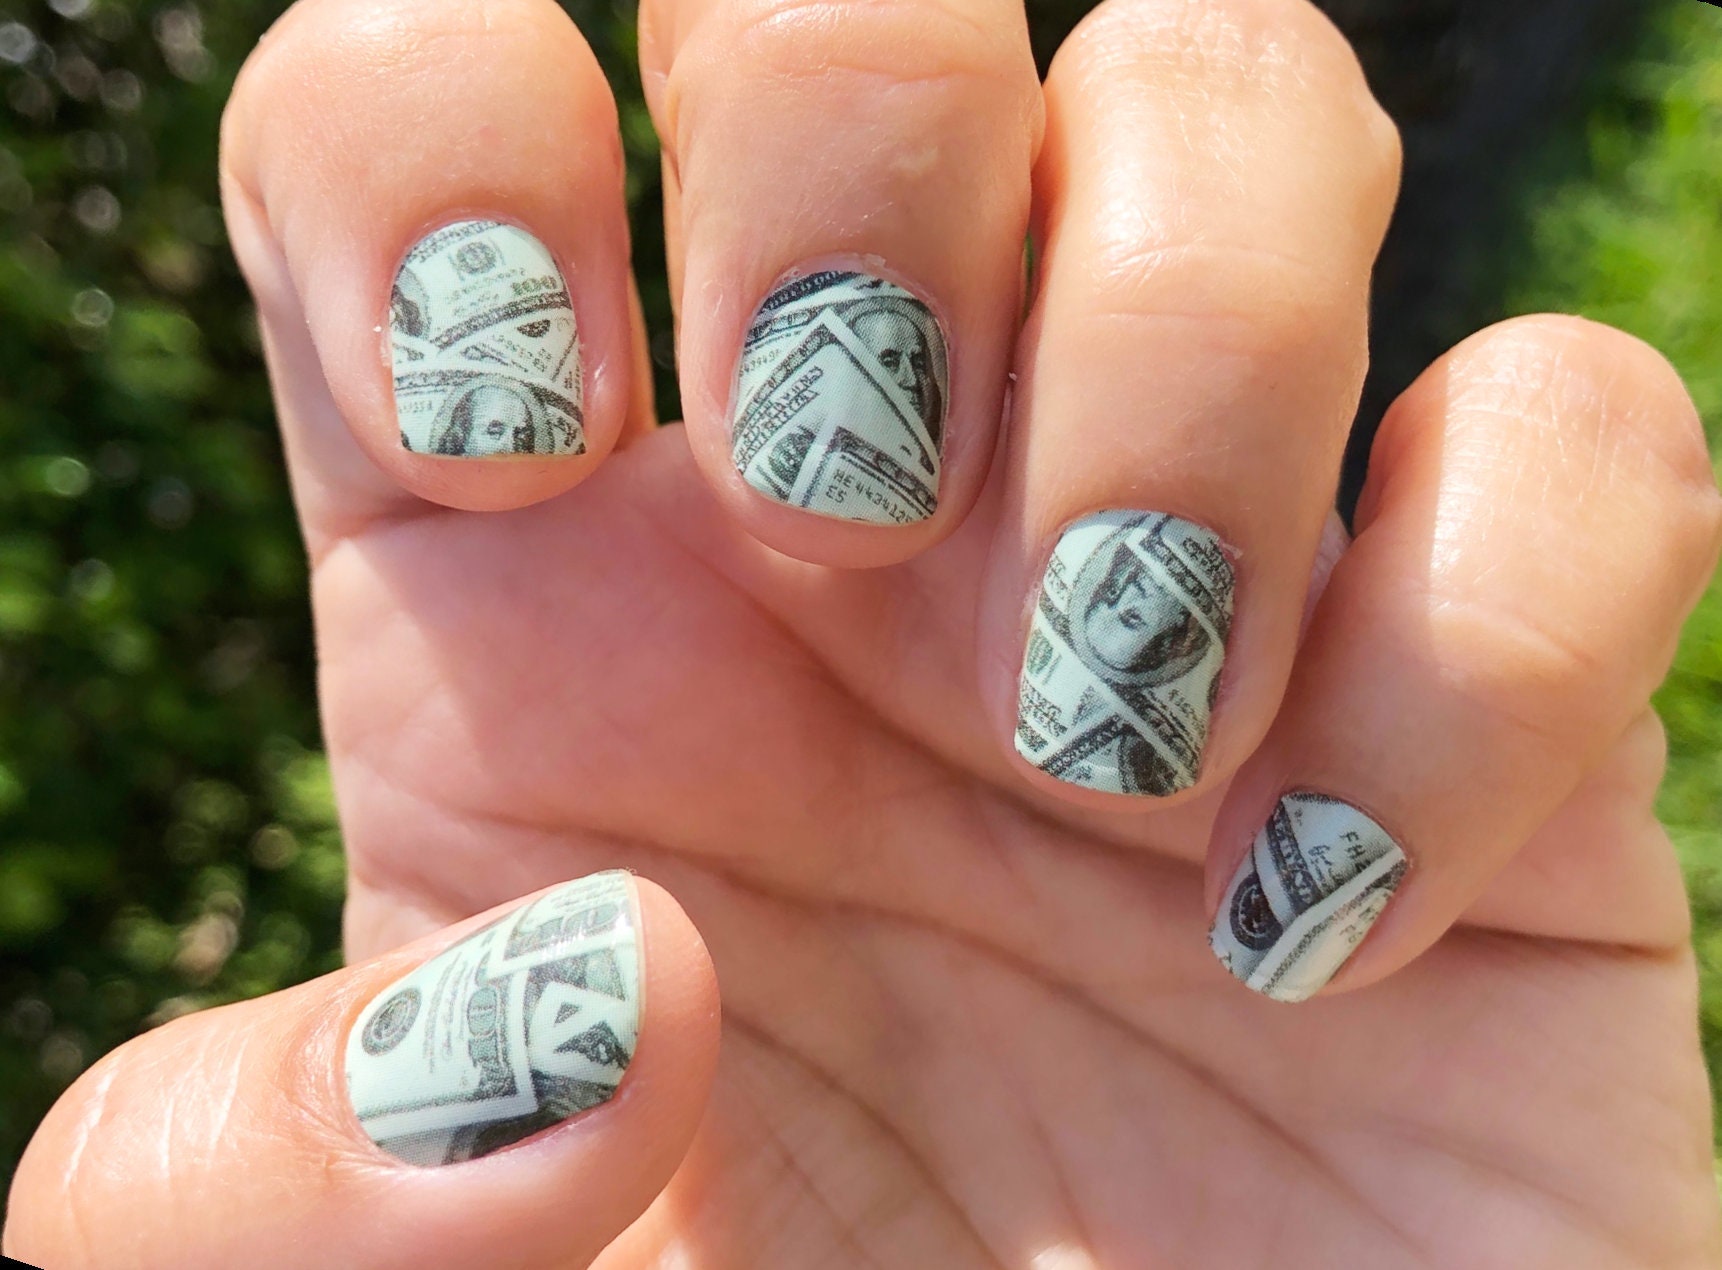 4 Sheets Nail Art Decals of 100 Dollar Sign Bill Nail Accessories Paper Money Design Treasure Currency Nail Stickers Tip